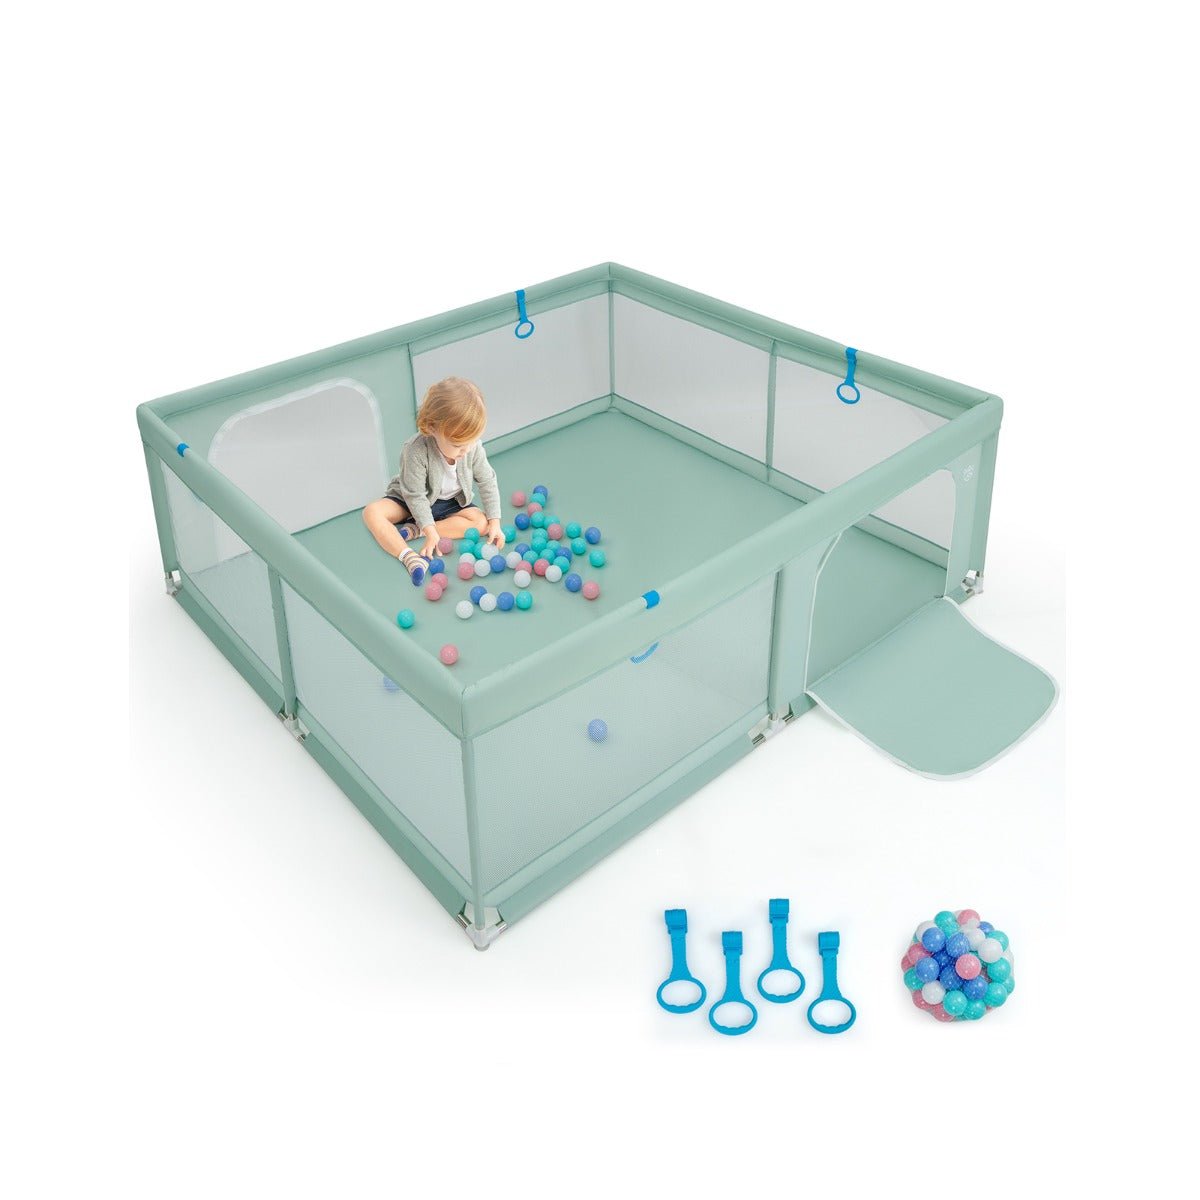 Explore, Laugh, and Learn in Our Play Pen